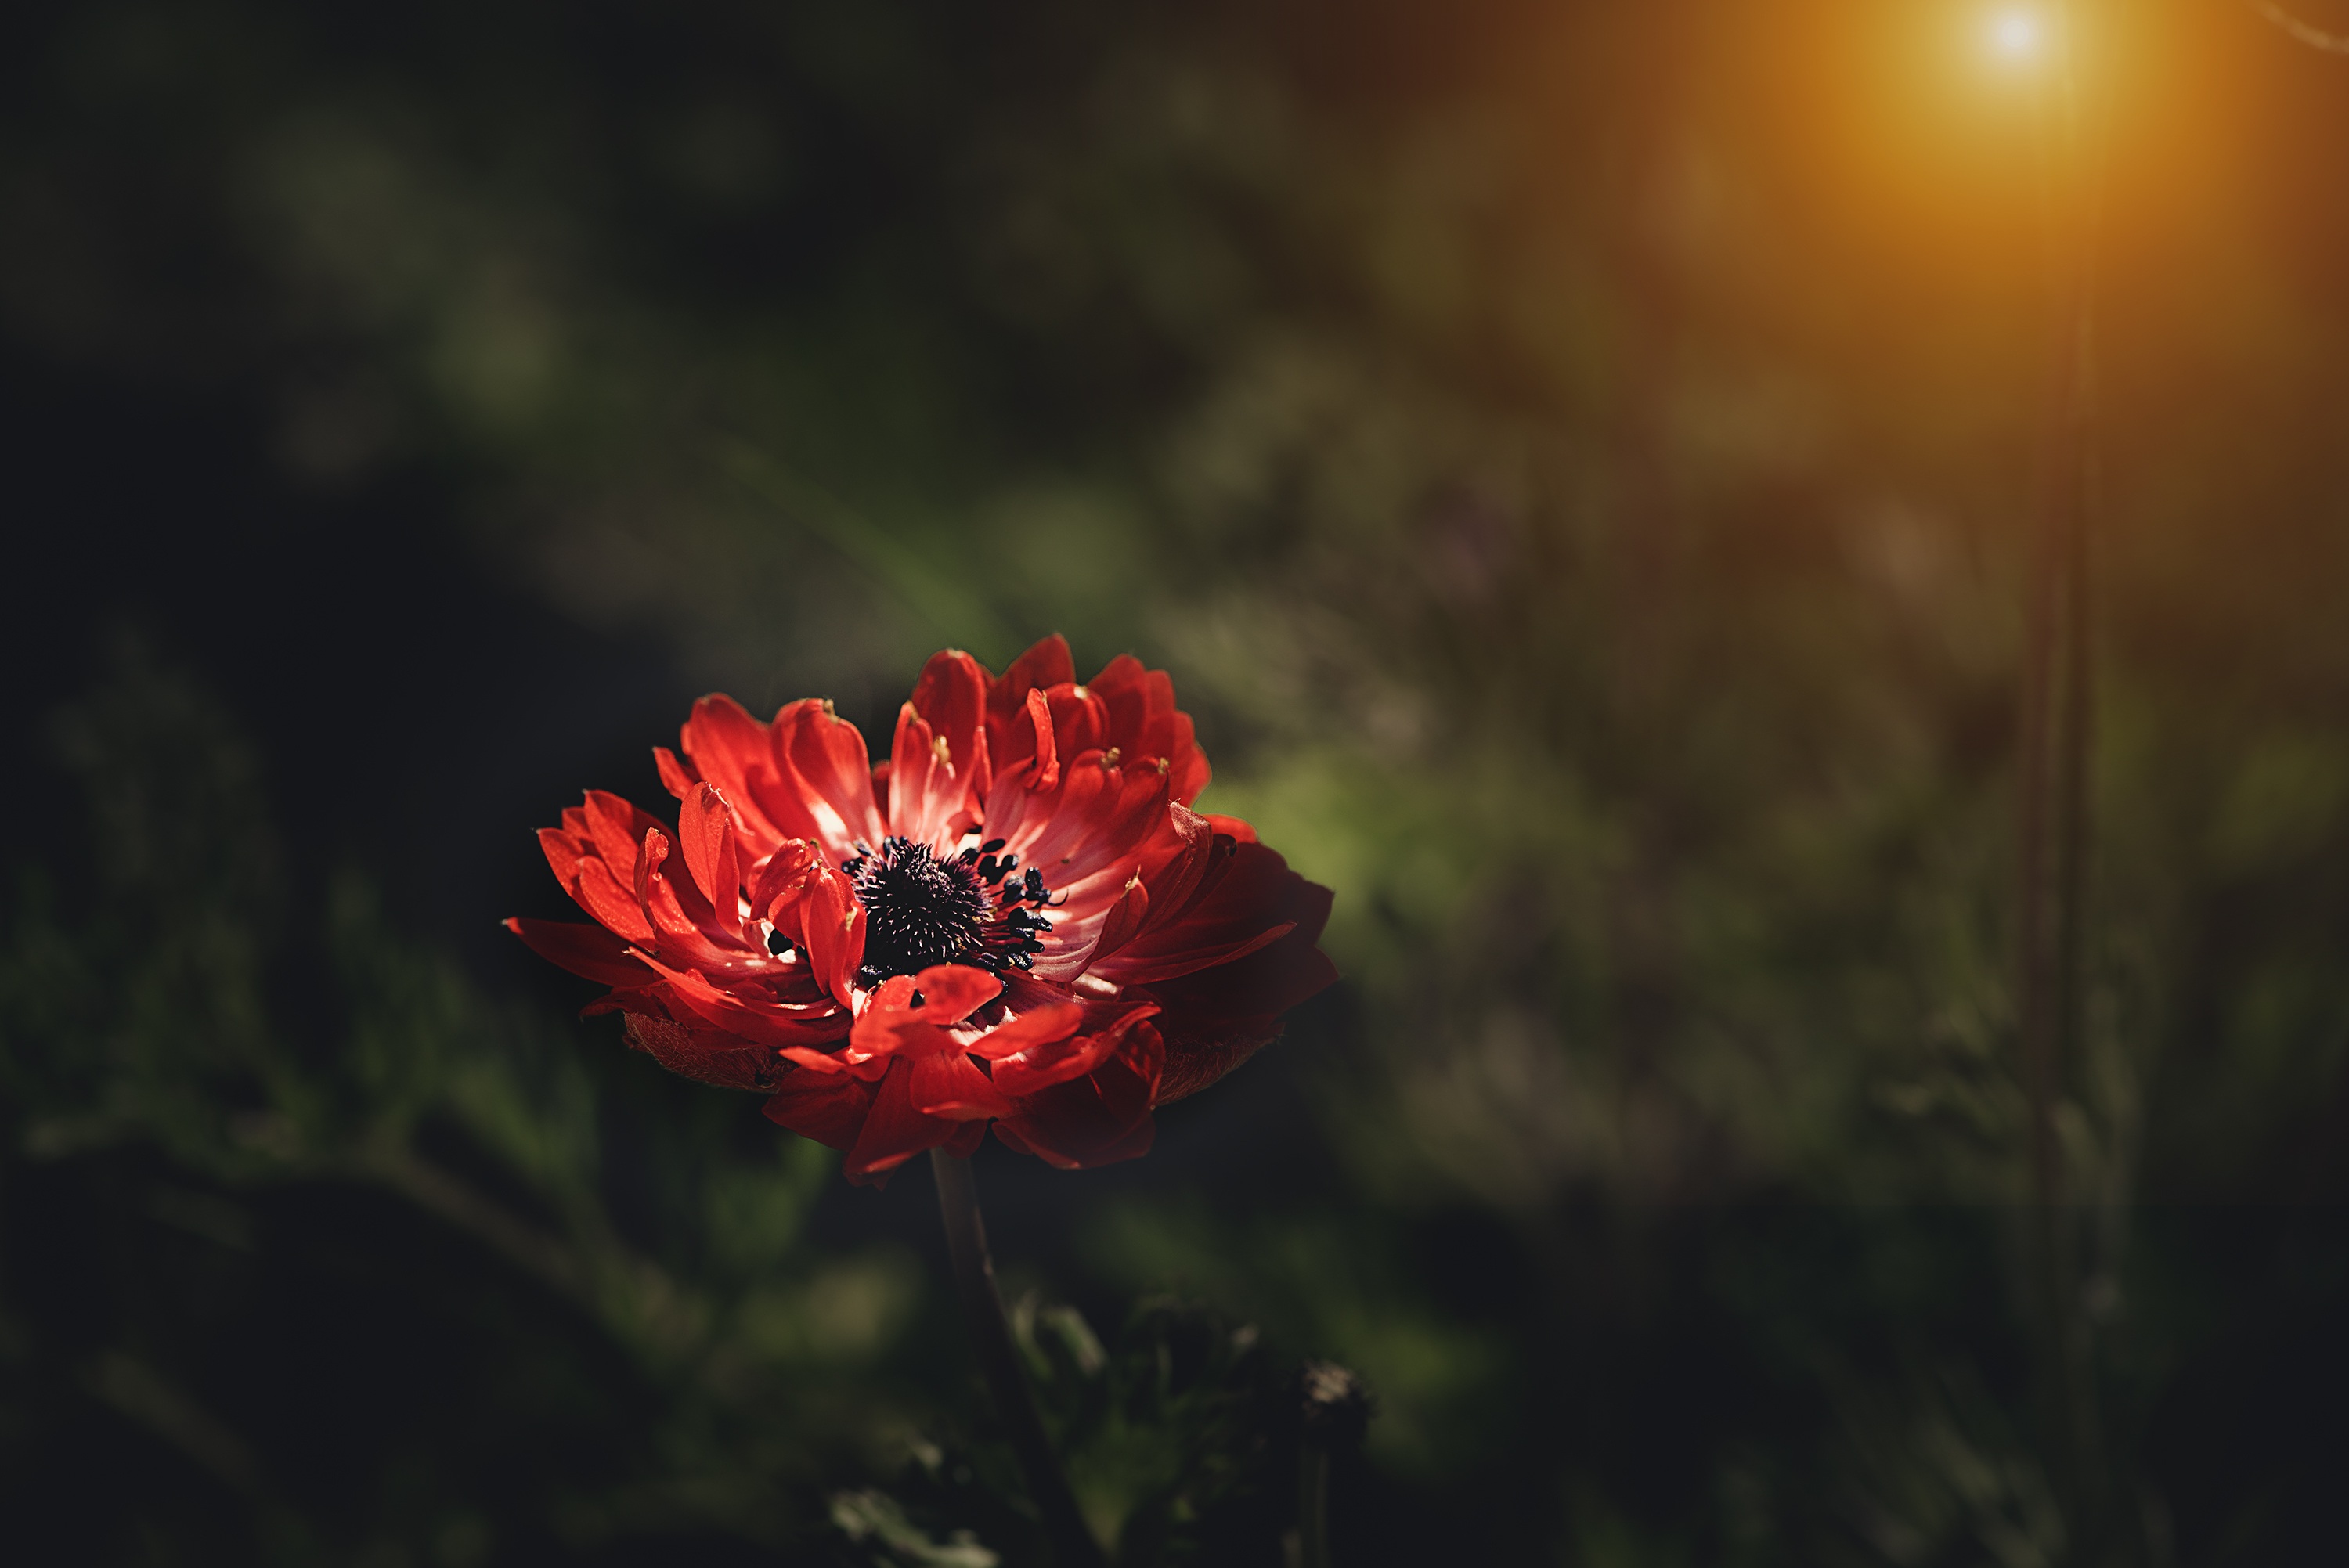 android stalk, flowers, red, flower, petals, stem, anemone